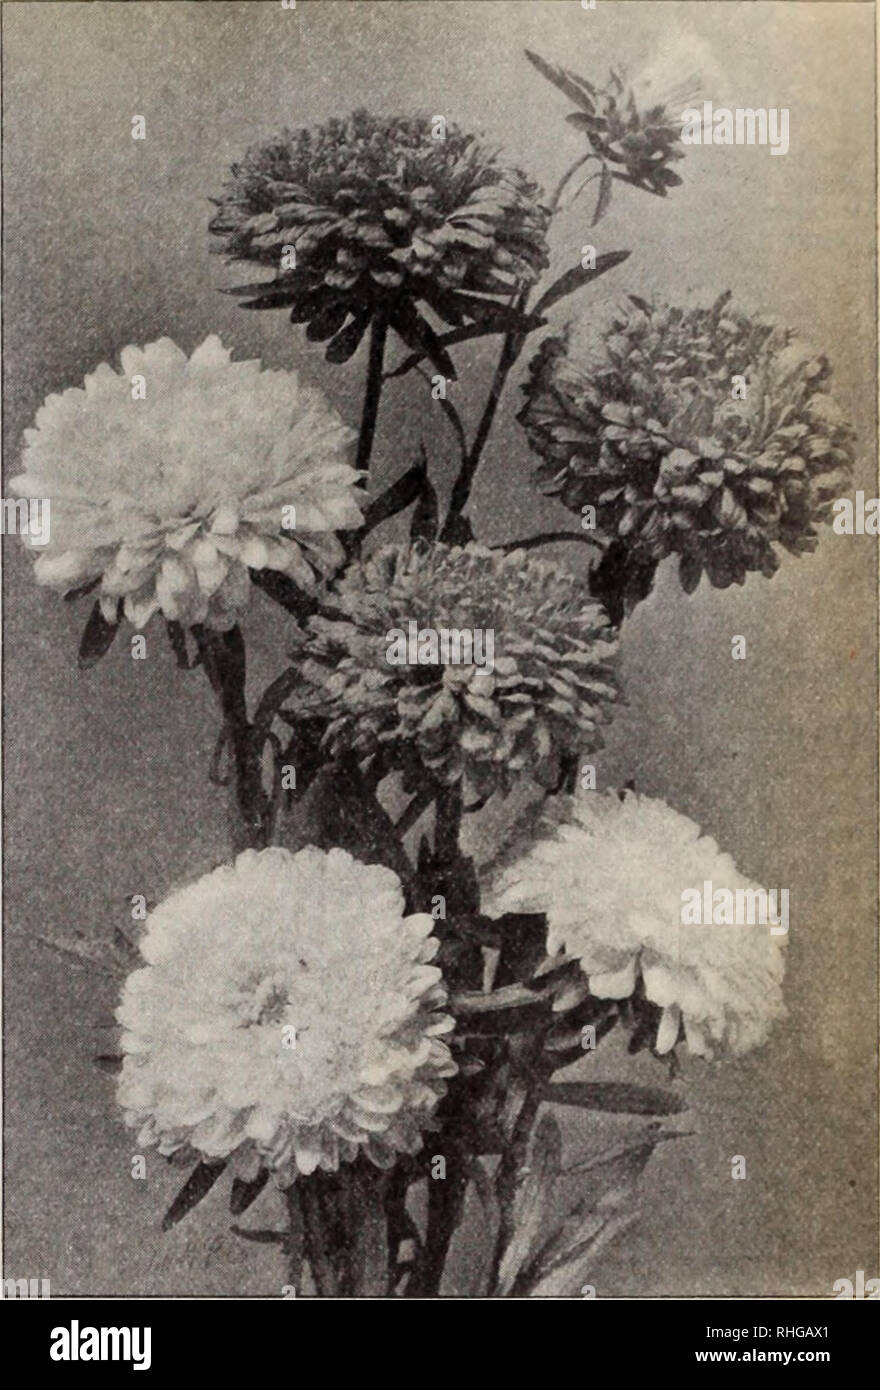 . Boddington's quality bulbs, seeds and plants / Arthur T. Boddington.. Nursery Catalogue. Victoria Asters whorl of shorter curled and twisted ones, like Japanese chrysanthemums, forms flowers of e.xtraordinary size atid beauty. Pkt. Vtoi. Crimson $0 10 $1 00 Scarlet 10 i 00 Yellow 10 I 00 White, changing to Amethyst-Blue 25 Mixed 10 I 00 The collection of 10 vaiieties for 75 cts. Boddington's Branching Giant Comet. 'hite 10 i 00 TrufFaut's Peony Perfection Asters The class is remarkable for the brilliant colors of its great incurved flowers. Snow-White Rose Light Blue Dark Blue Lilac Peach  Stock Photo